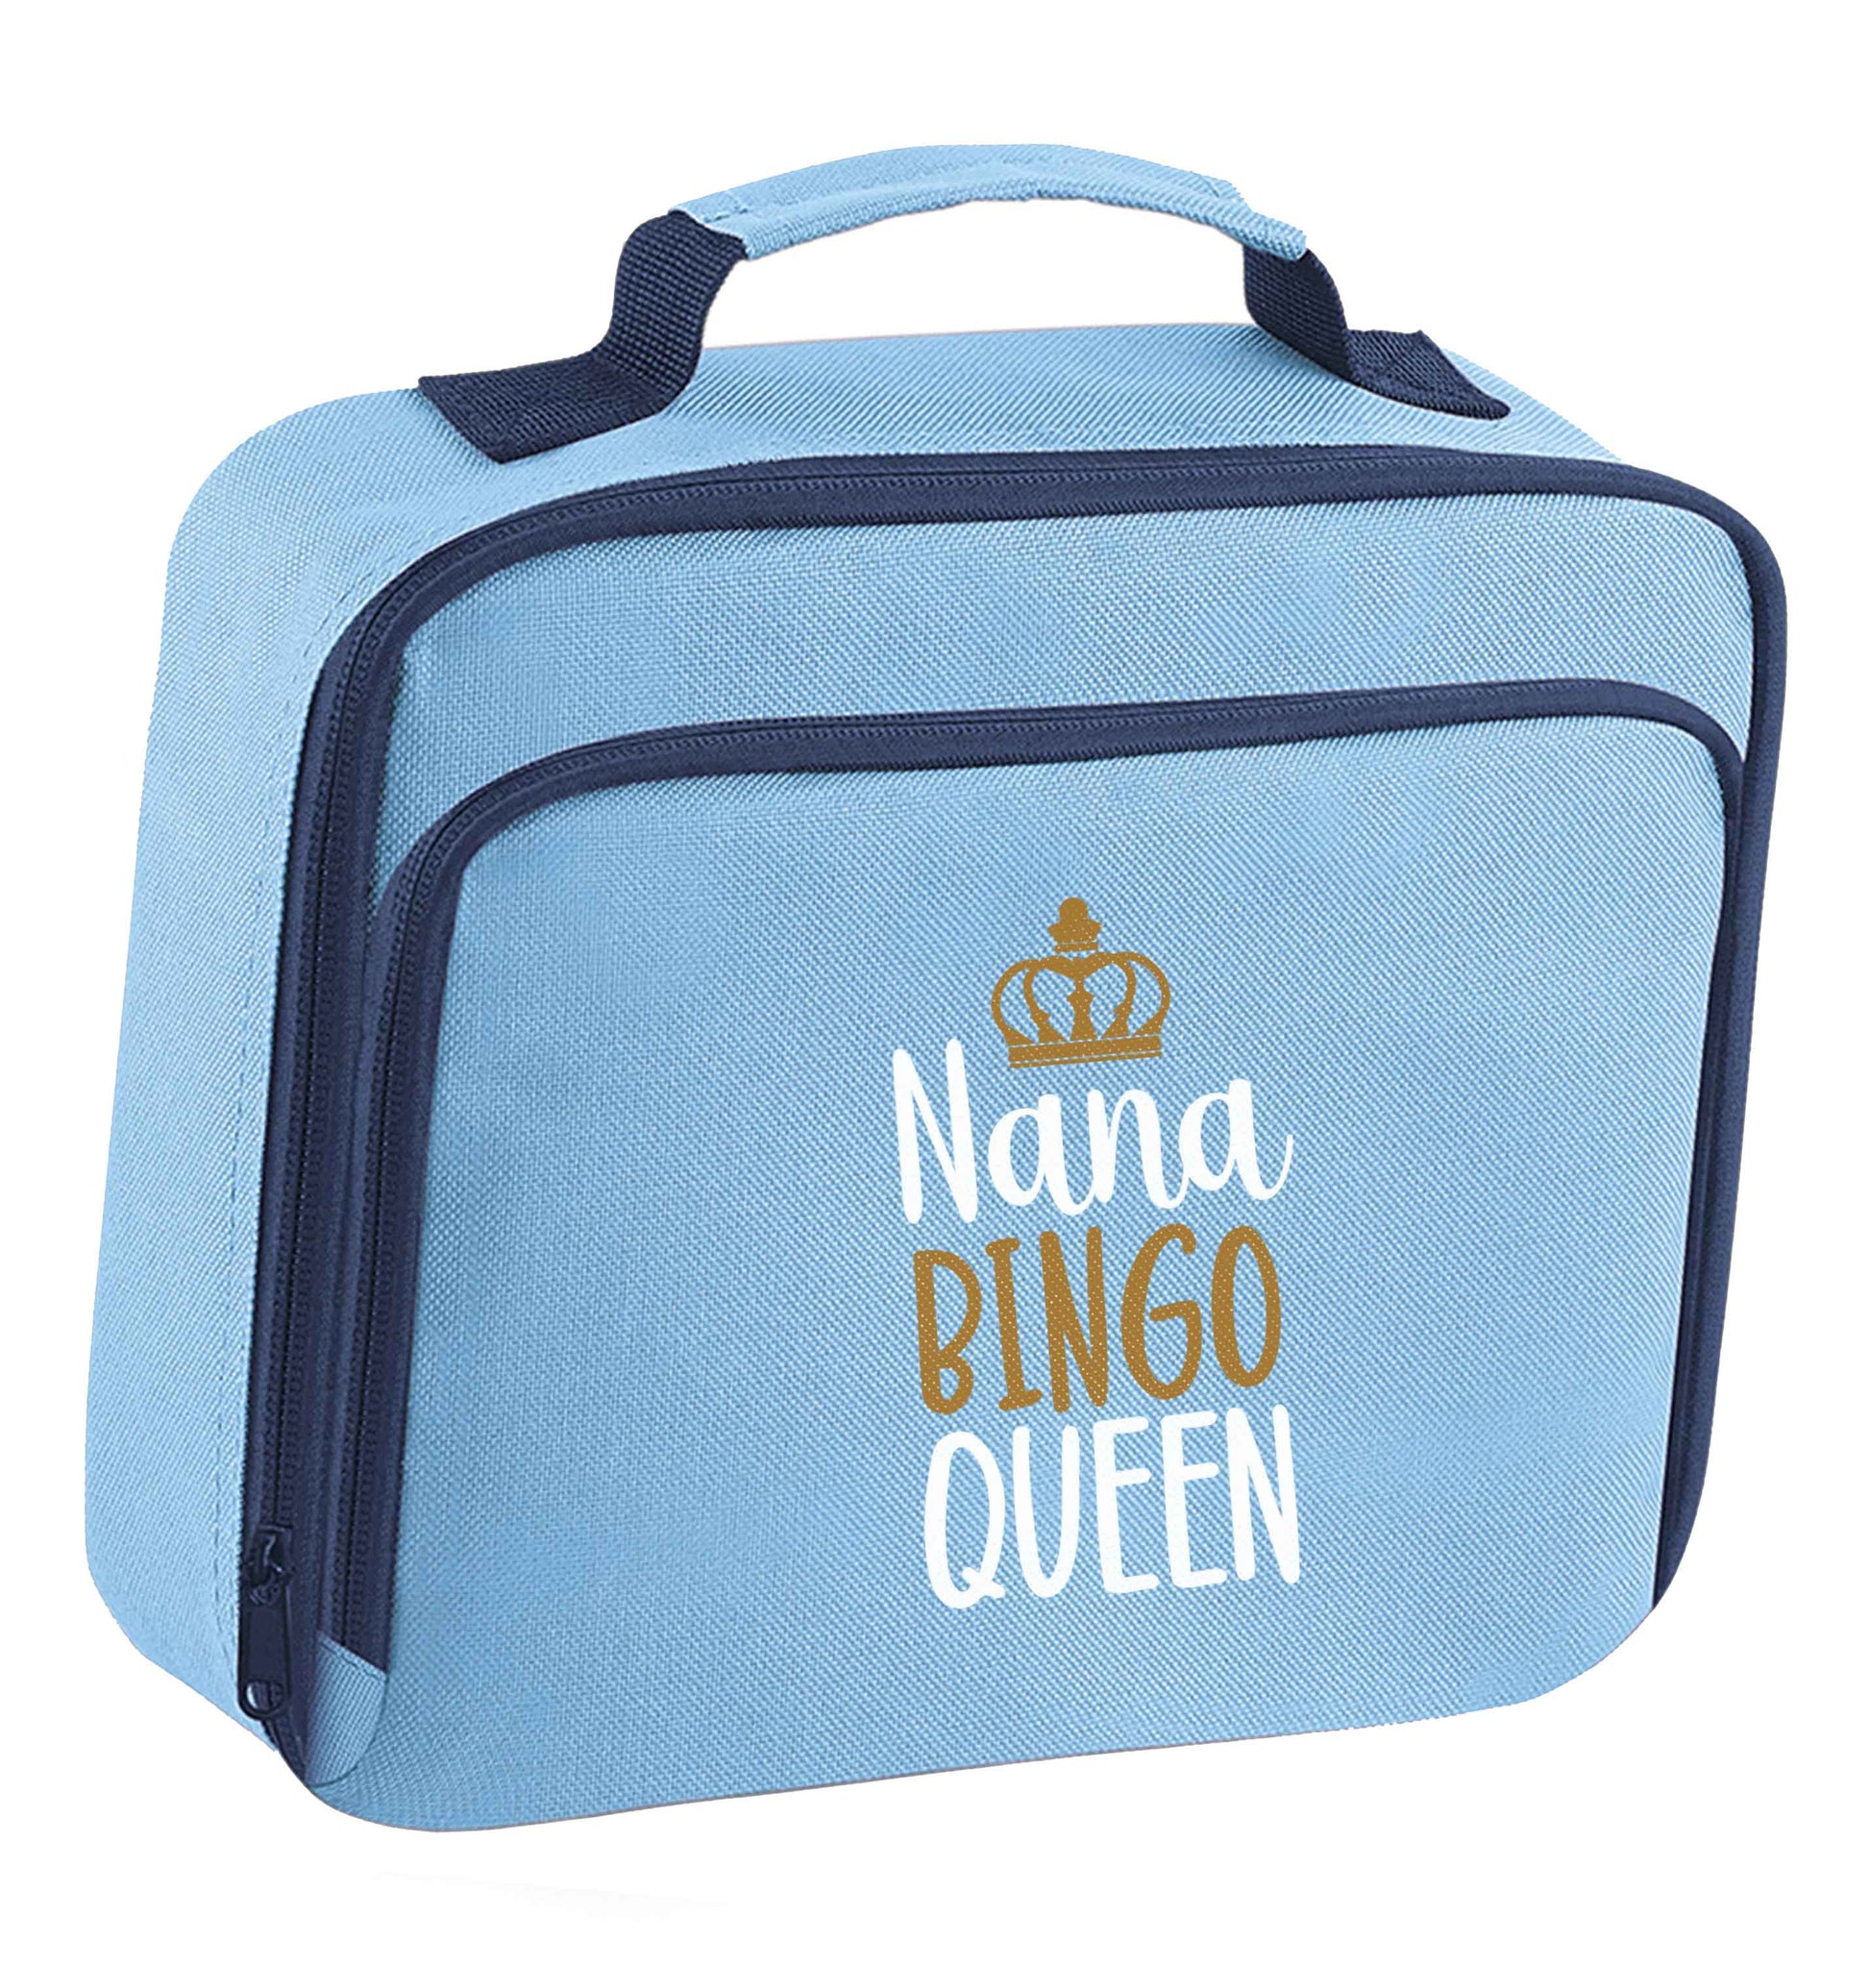 Personalised bingo queen insulated blue lunch bag cooler